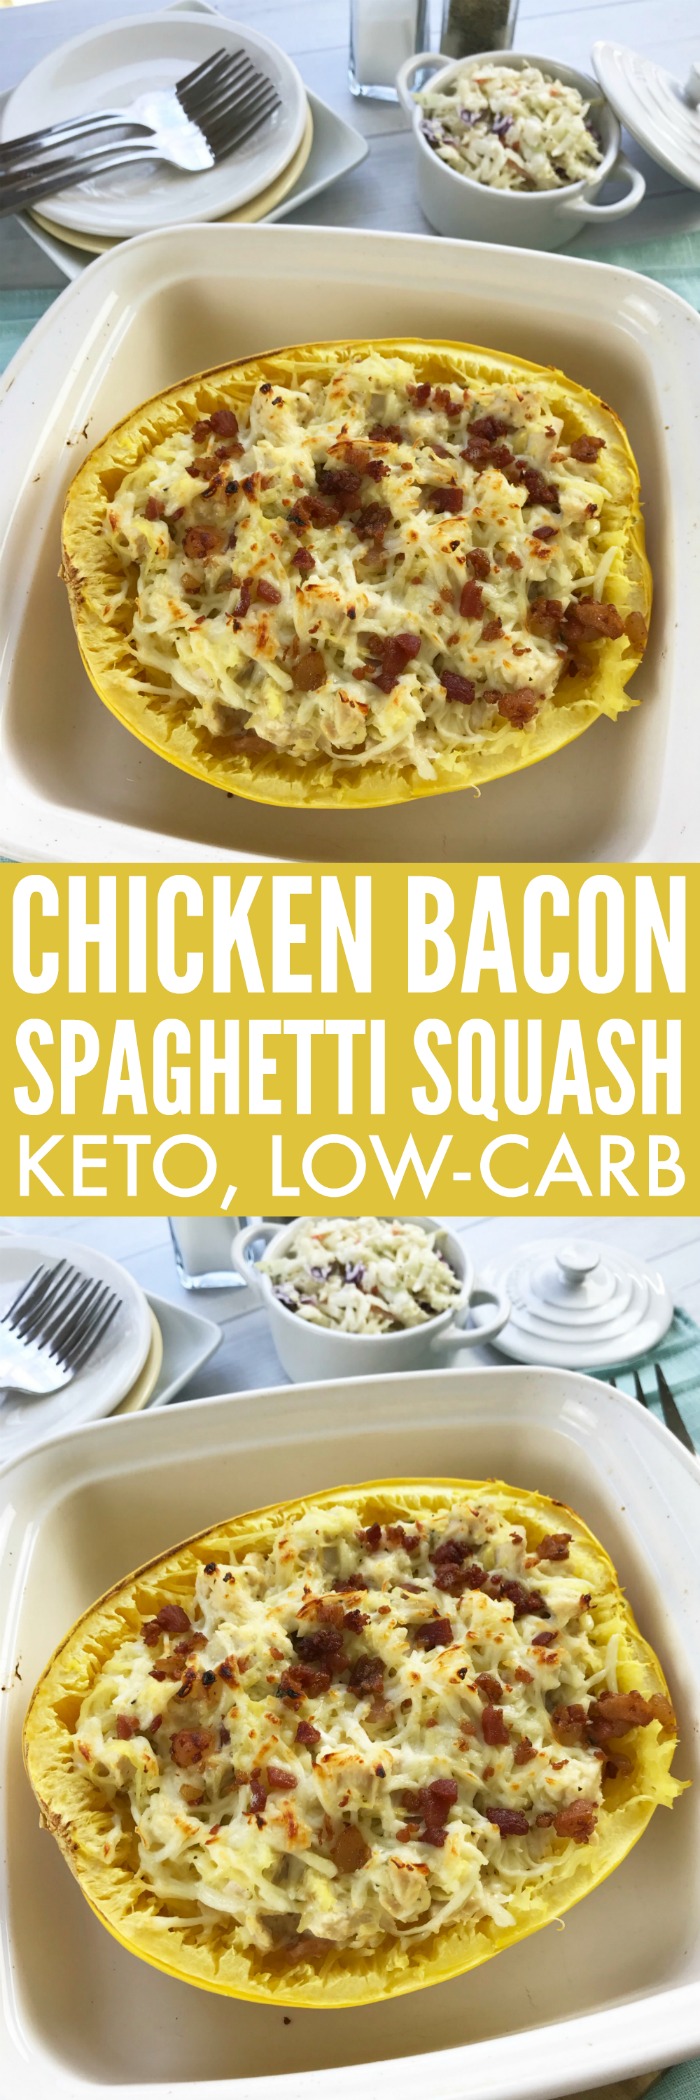 These Low Carb Spaghetti Squash Boats with Bacon, Cheese and Chicken will satisfy your craving for pasta and comfort food without giving into a carb-laden meal.